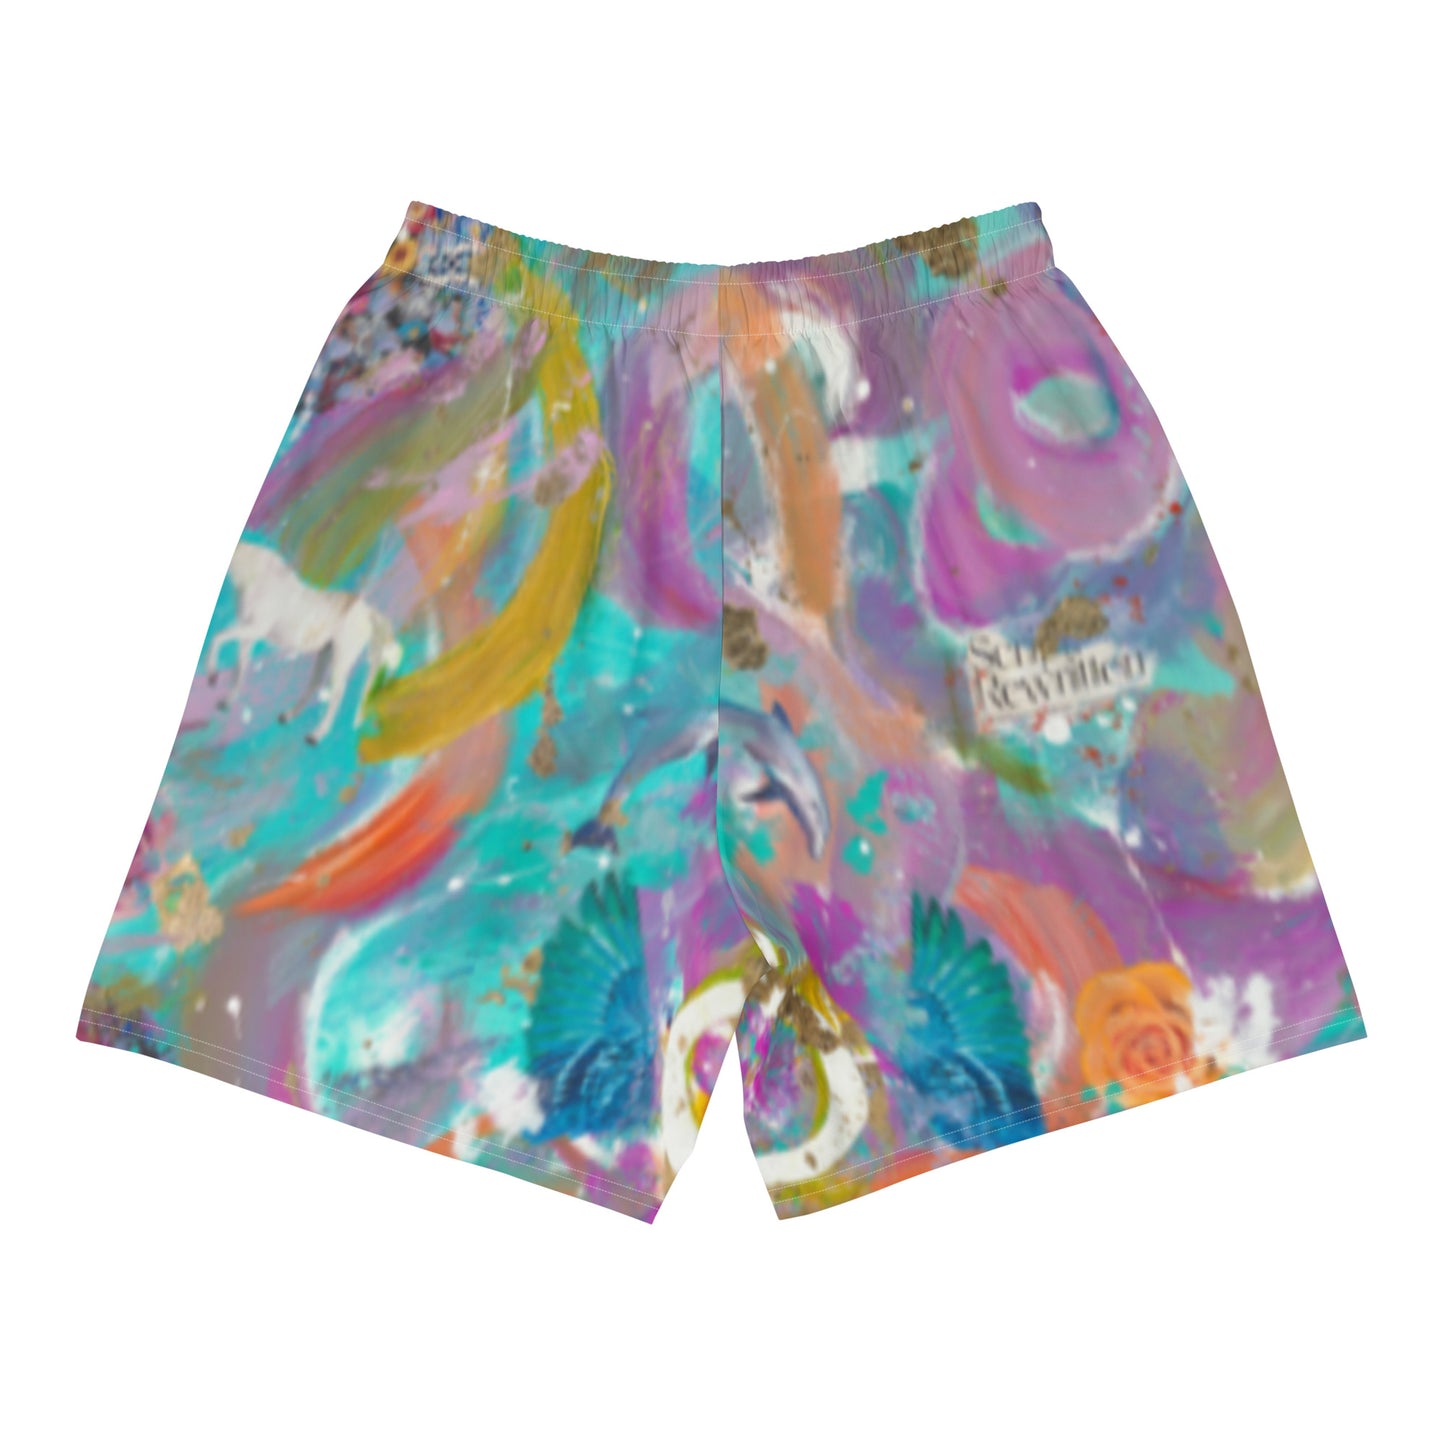 "TRULY FREE" Print (Abstract Painting made by Chianne) MEN'S ATHLETIC LONG SHORTS